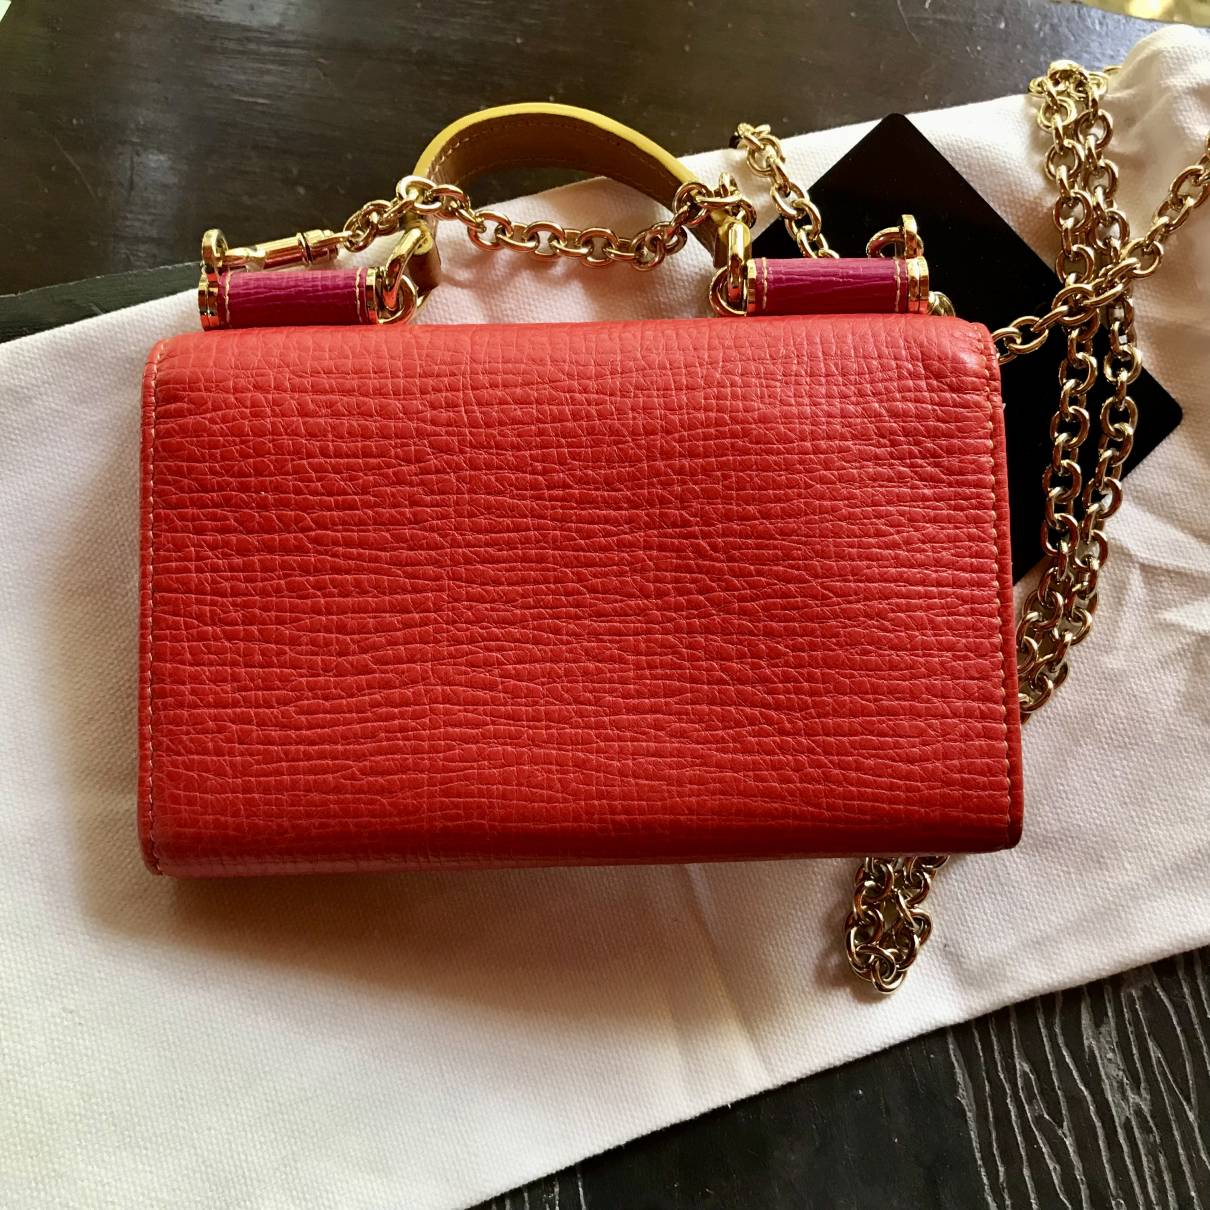 Dolce & Gabbana Small Sicily Dauphine Leather Bag - Red